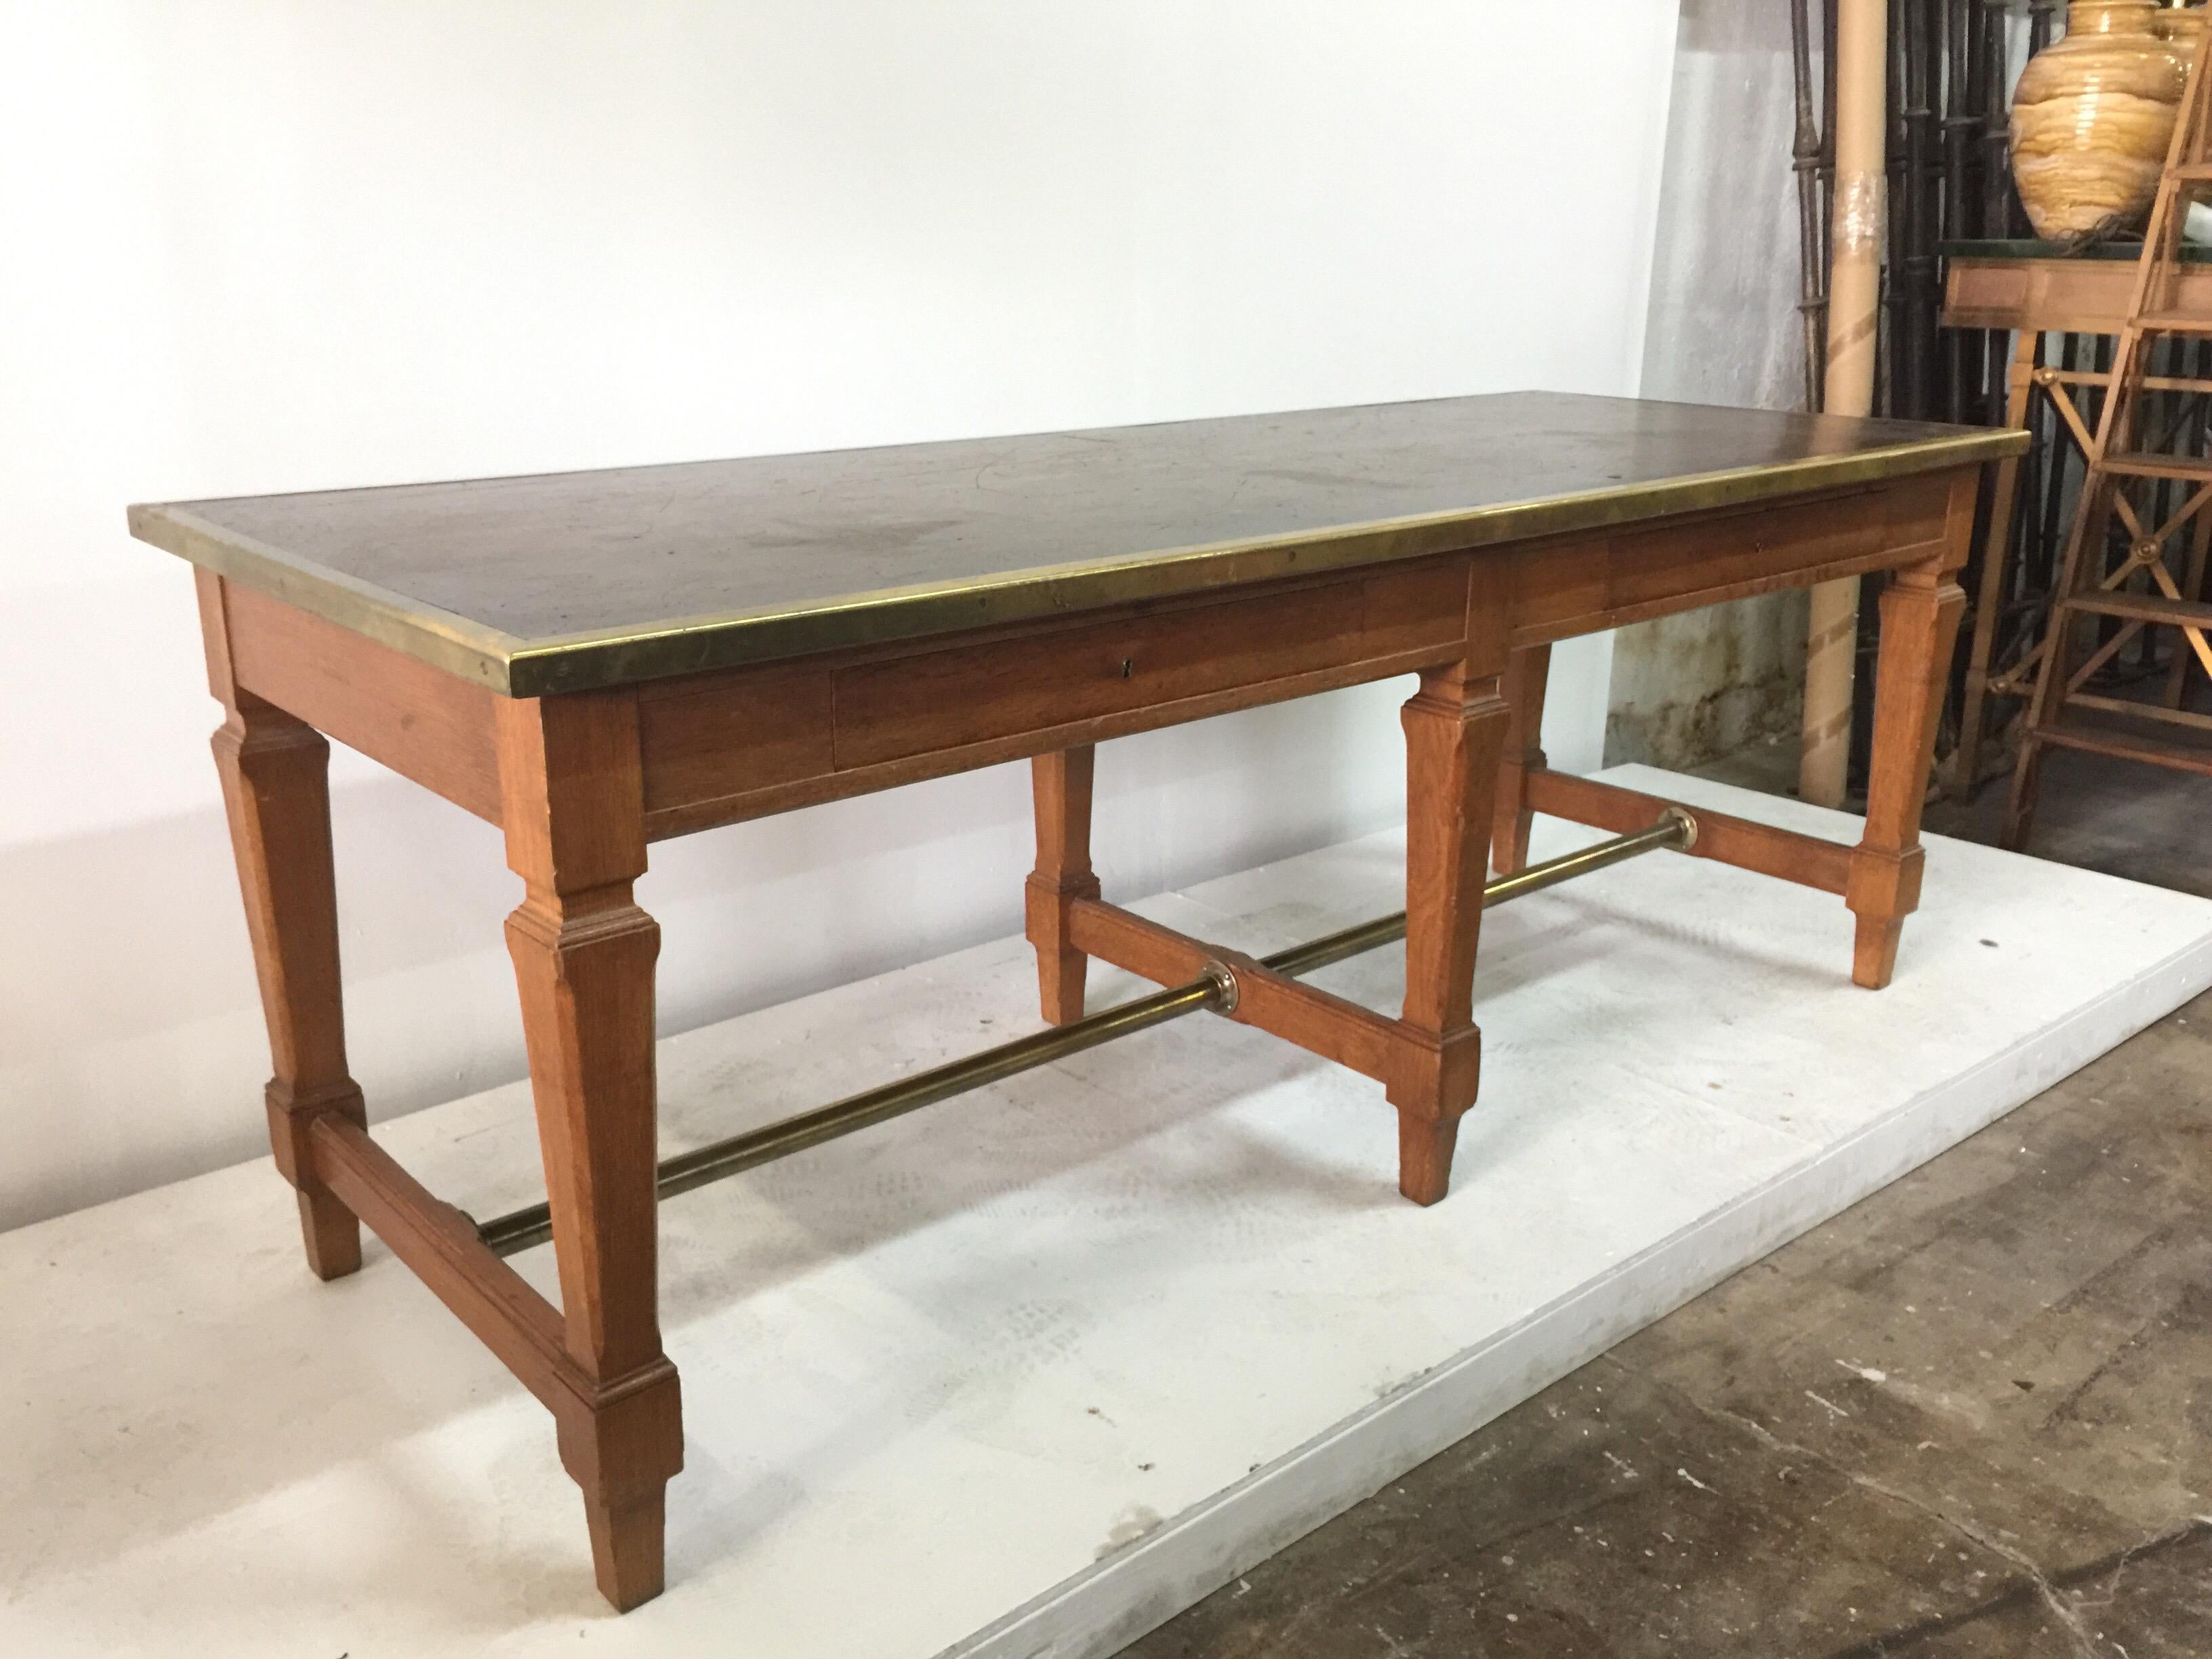 Equipped with two front drawers, original key (single key locks both drawers) and brass molding which frames the top in aged cognac leather. Brass stretcher at base. Exceptional design very much after Jacques Adnet. This piece is great scale as a